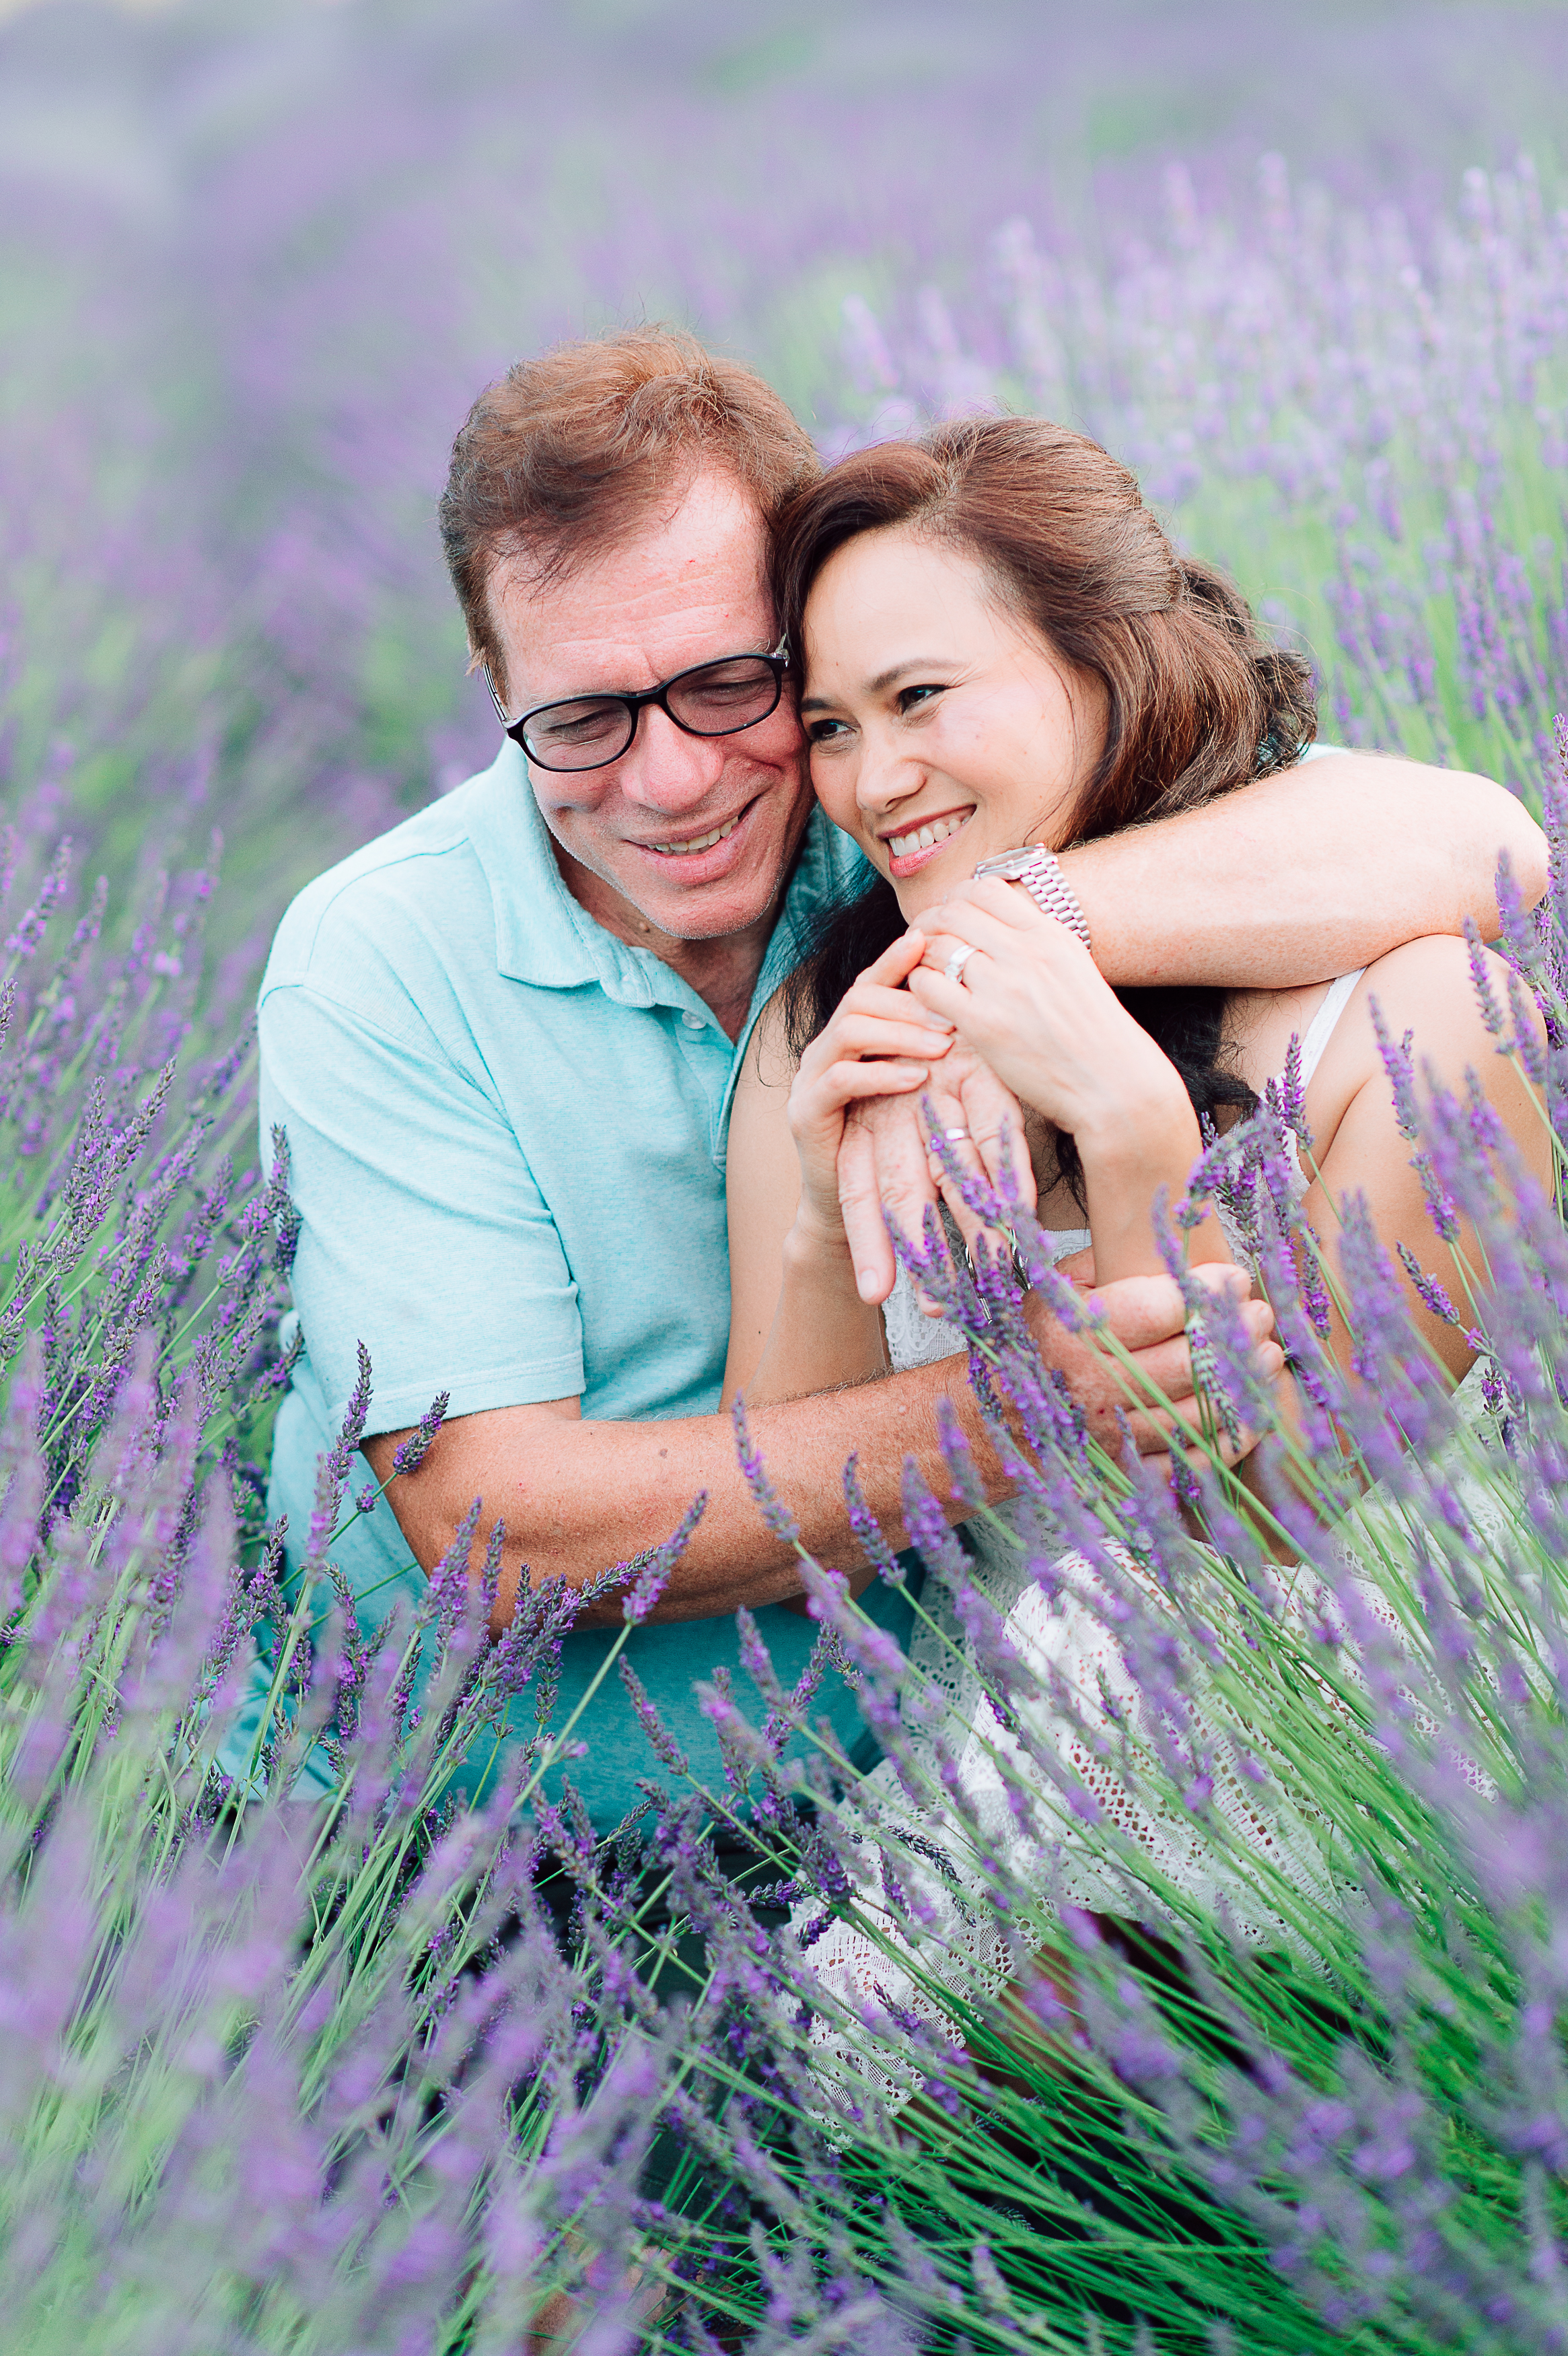 engagement_lavenderfield_youseephotography_LidiaOtto (25).jpg